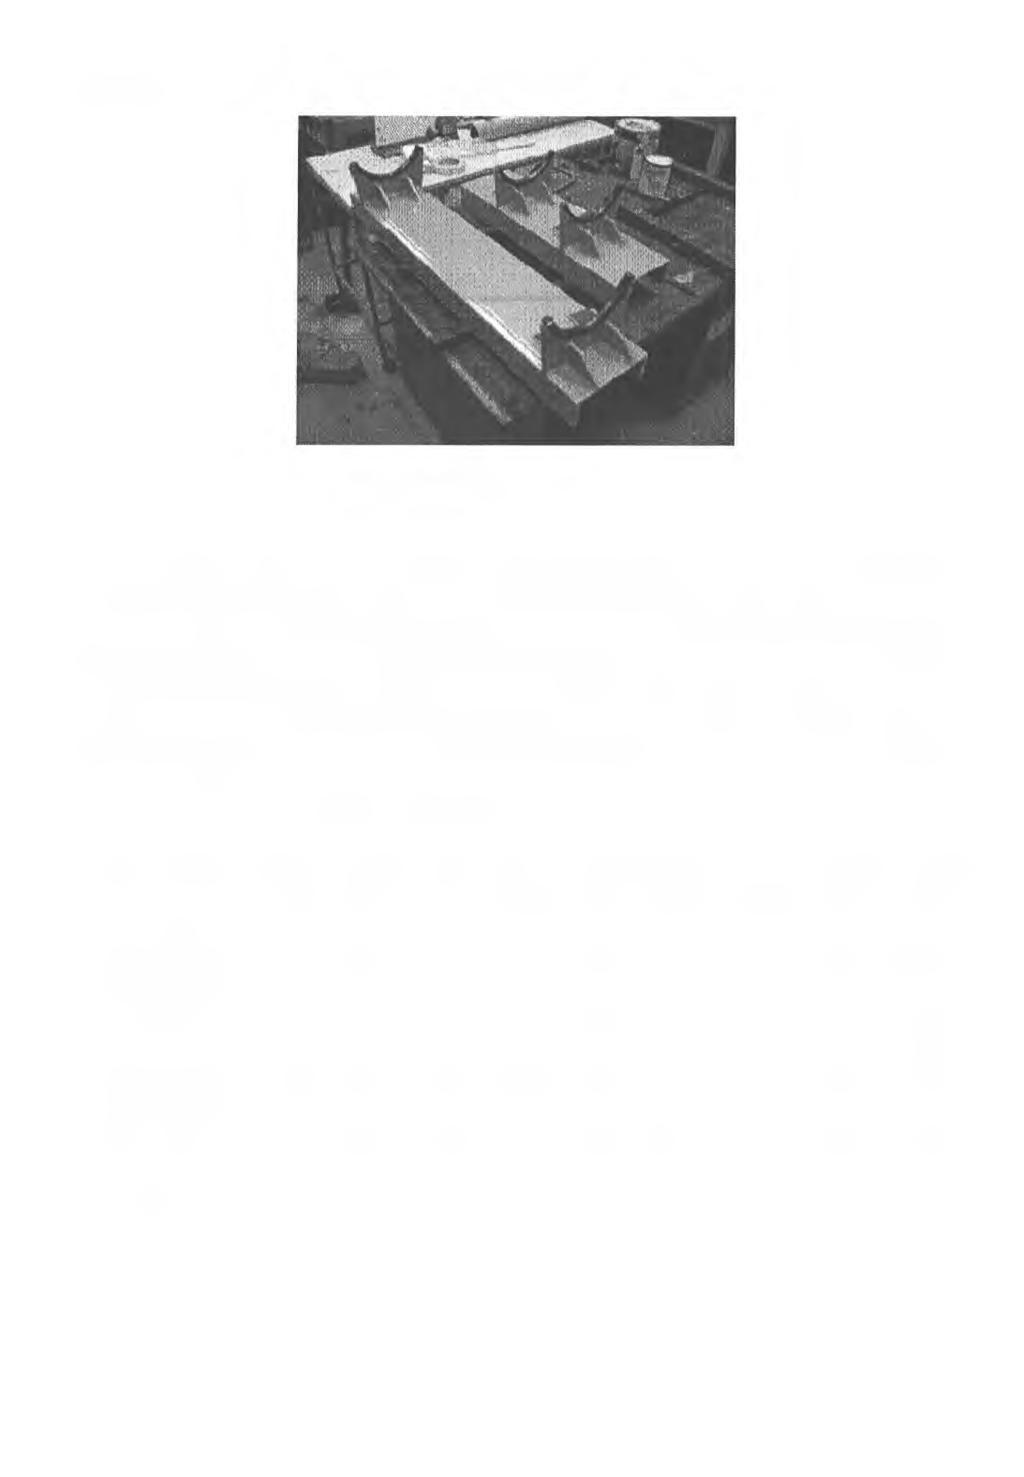 Fig. 5 Four point bending loading frame. 4 RESULTS All specimens were tested using a 5000 kn compression testing machine in the civil engineering laboratories at the University of Wollongong.